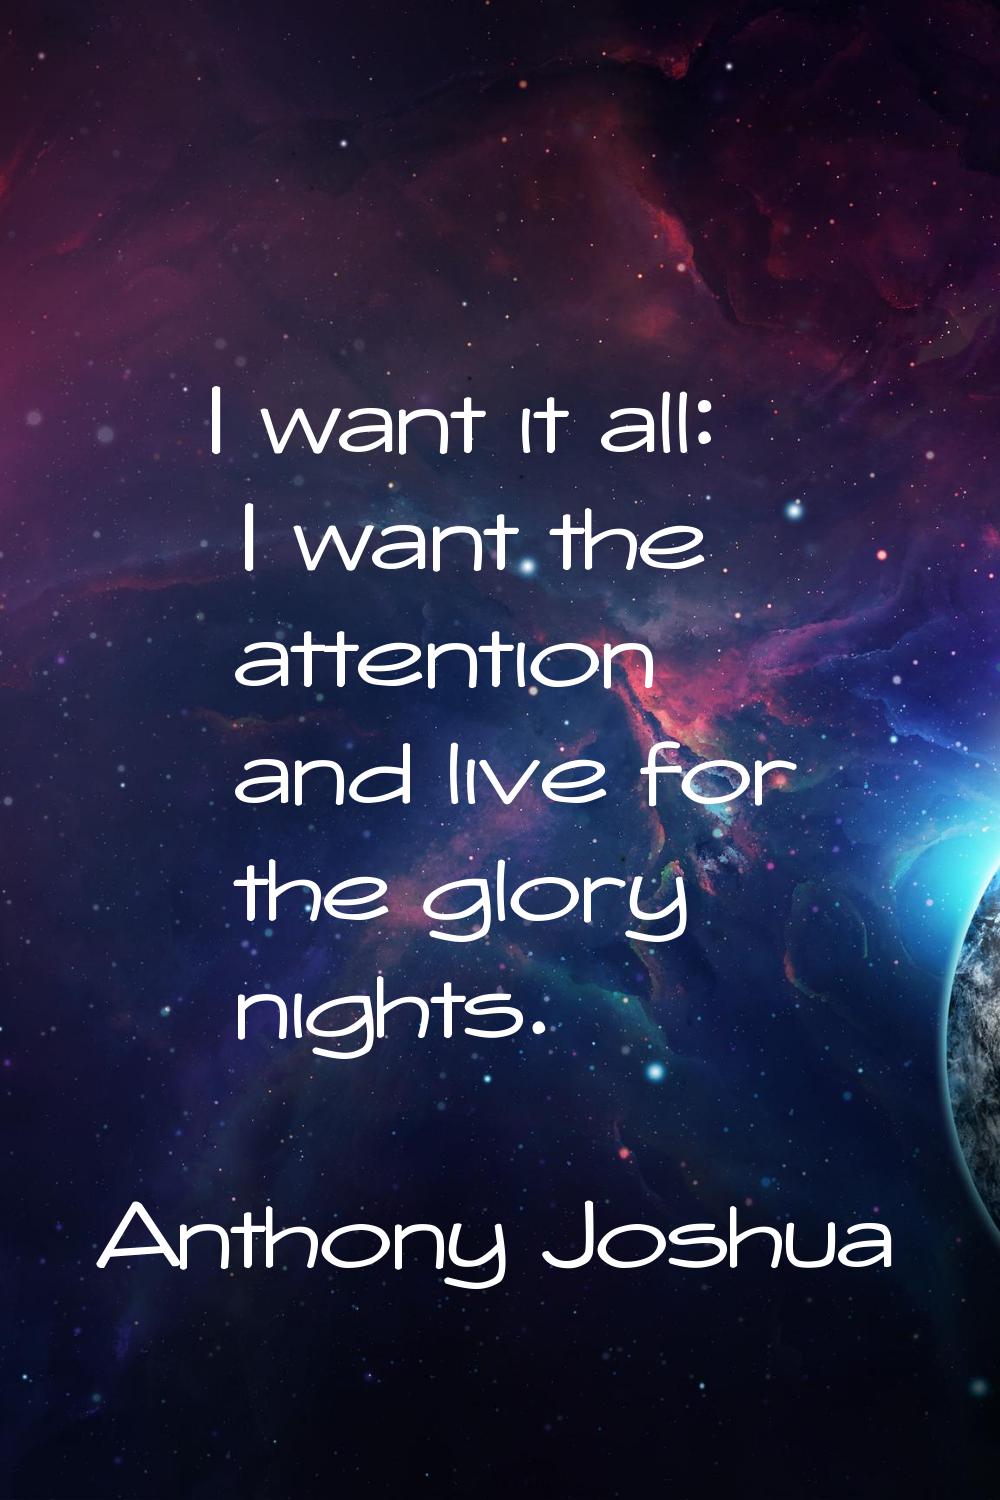 I want it all: I want the attention and live for the glory nights.